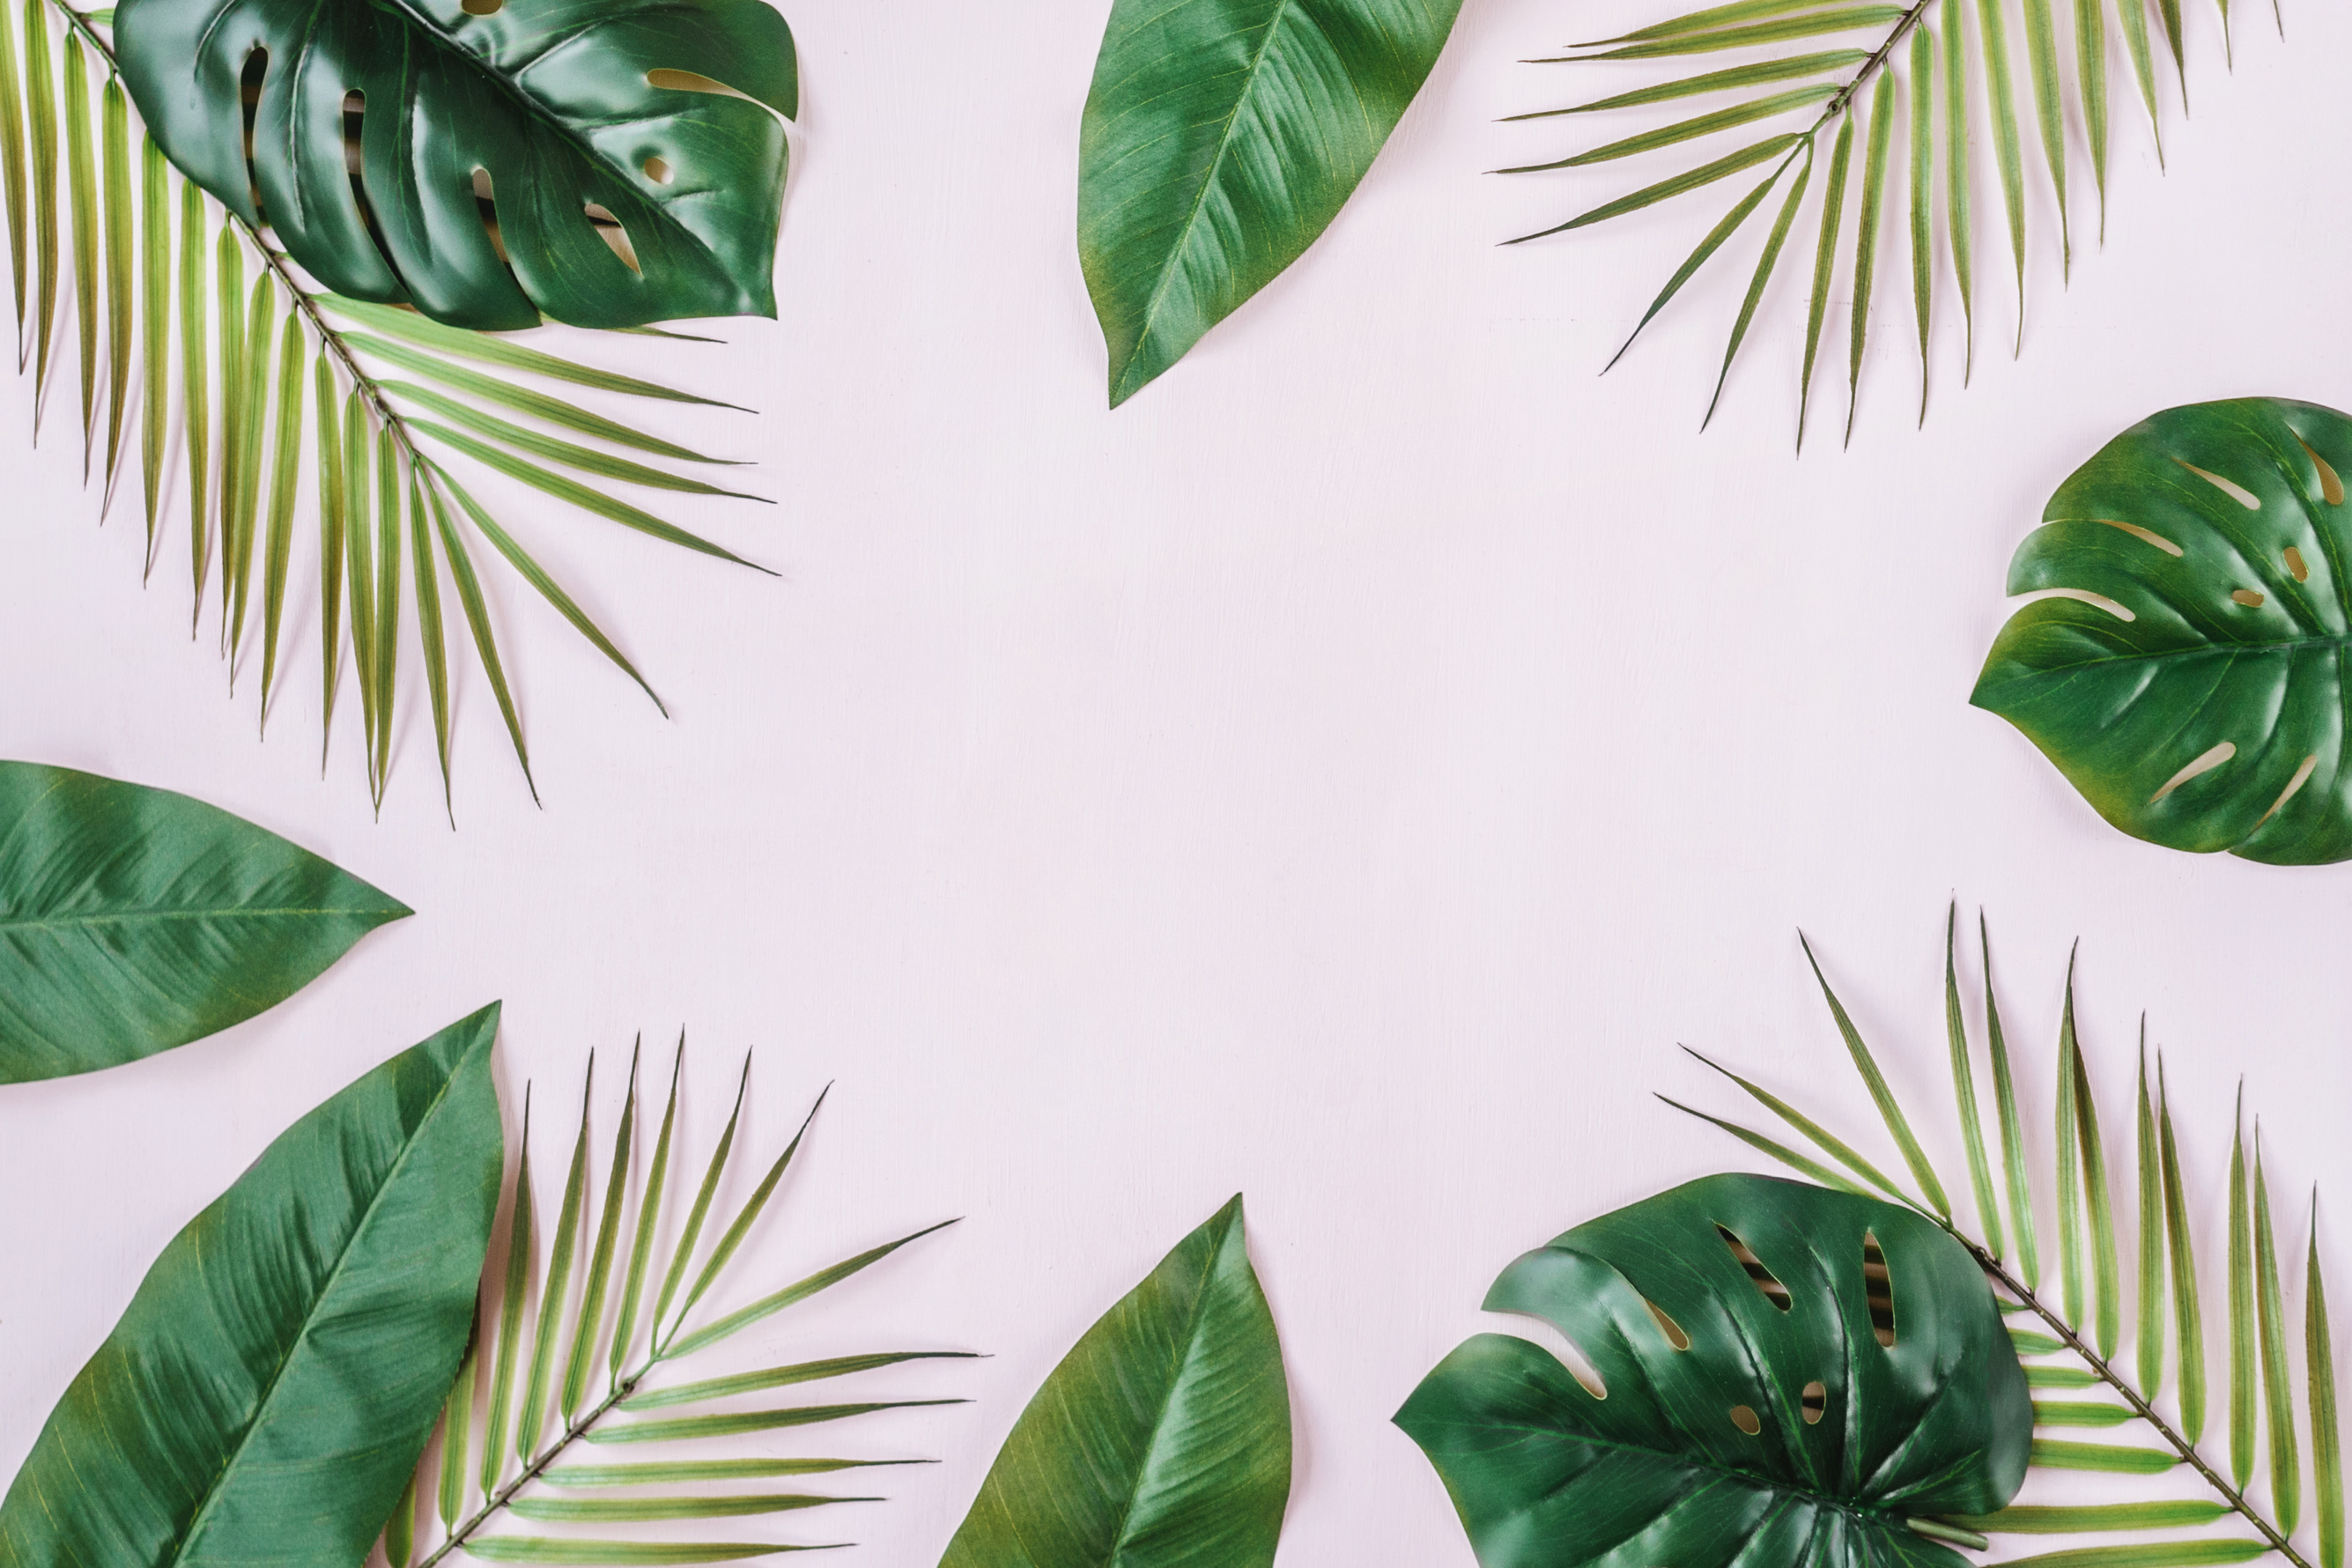 Tropical Jungle Leaves Background